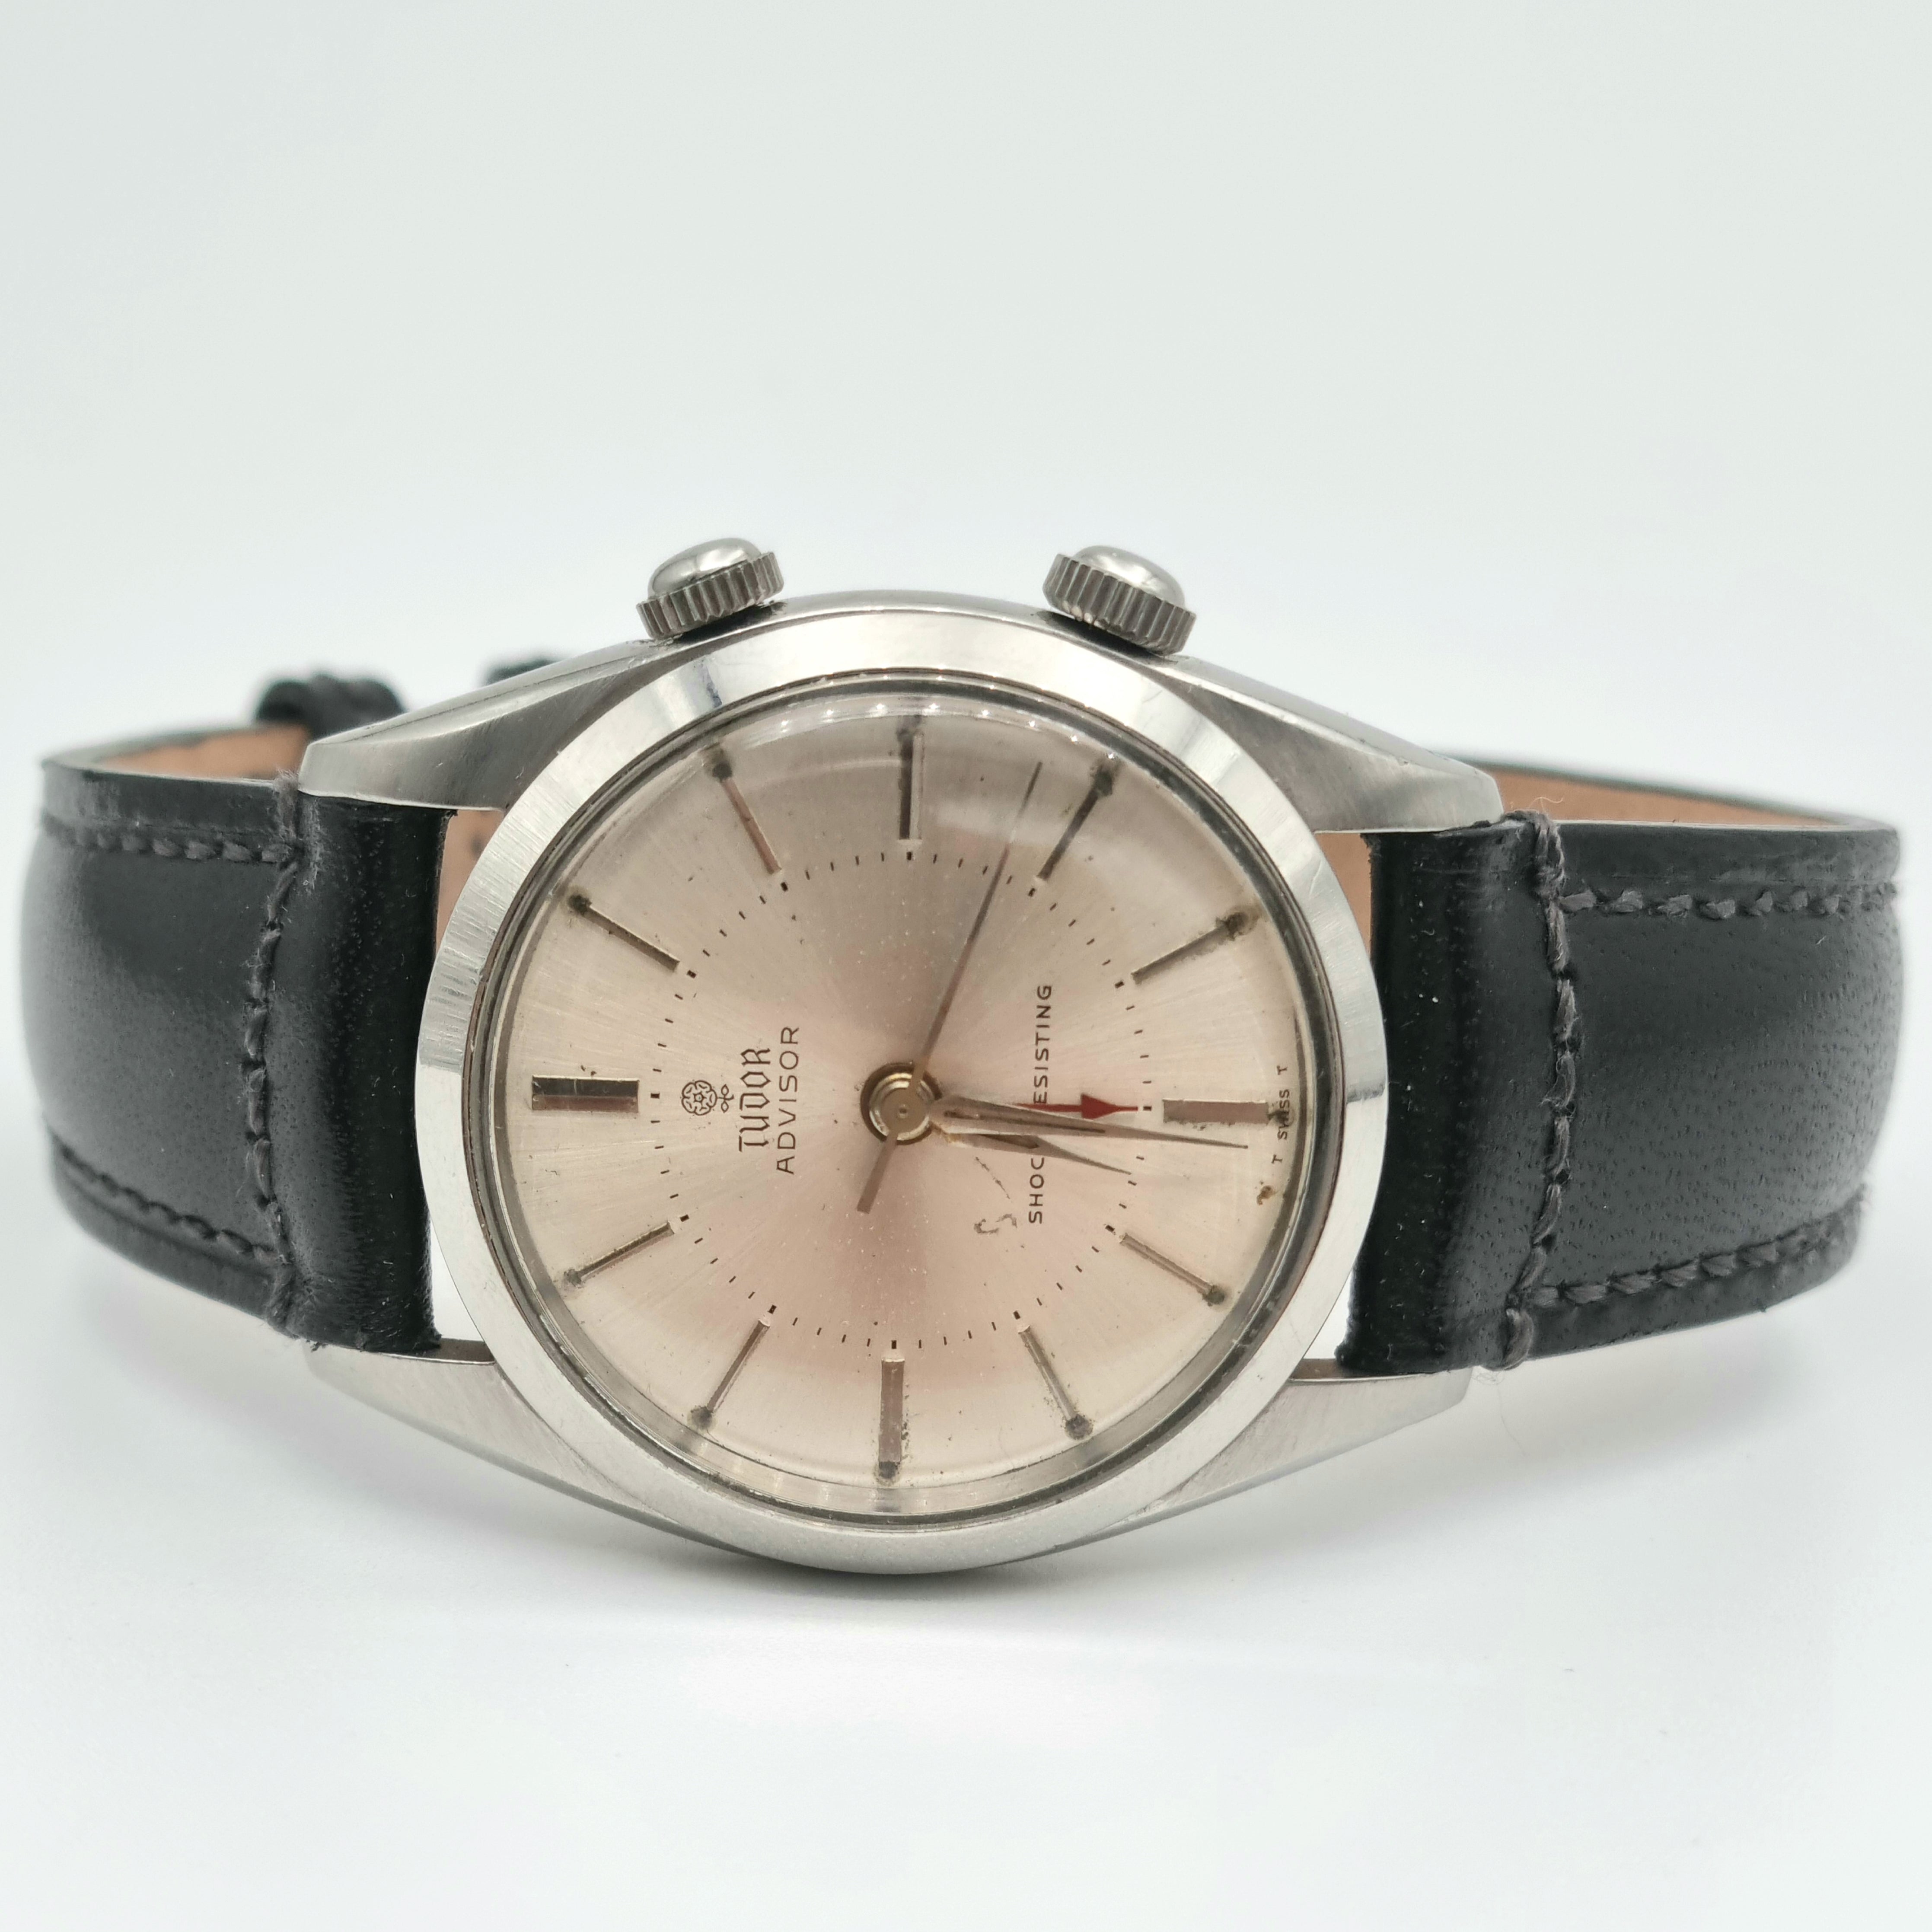 Previously Owned TUDOR Heritage Advisor Men's Watch | Jared